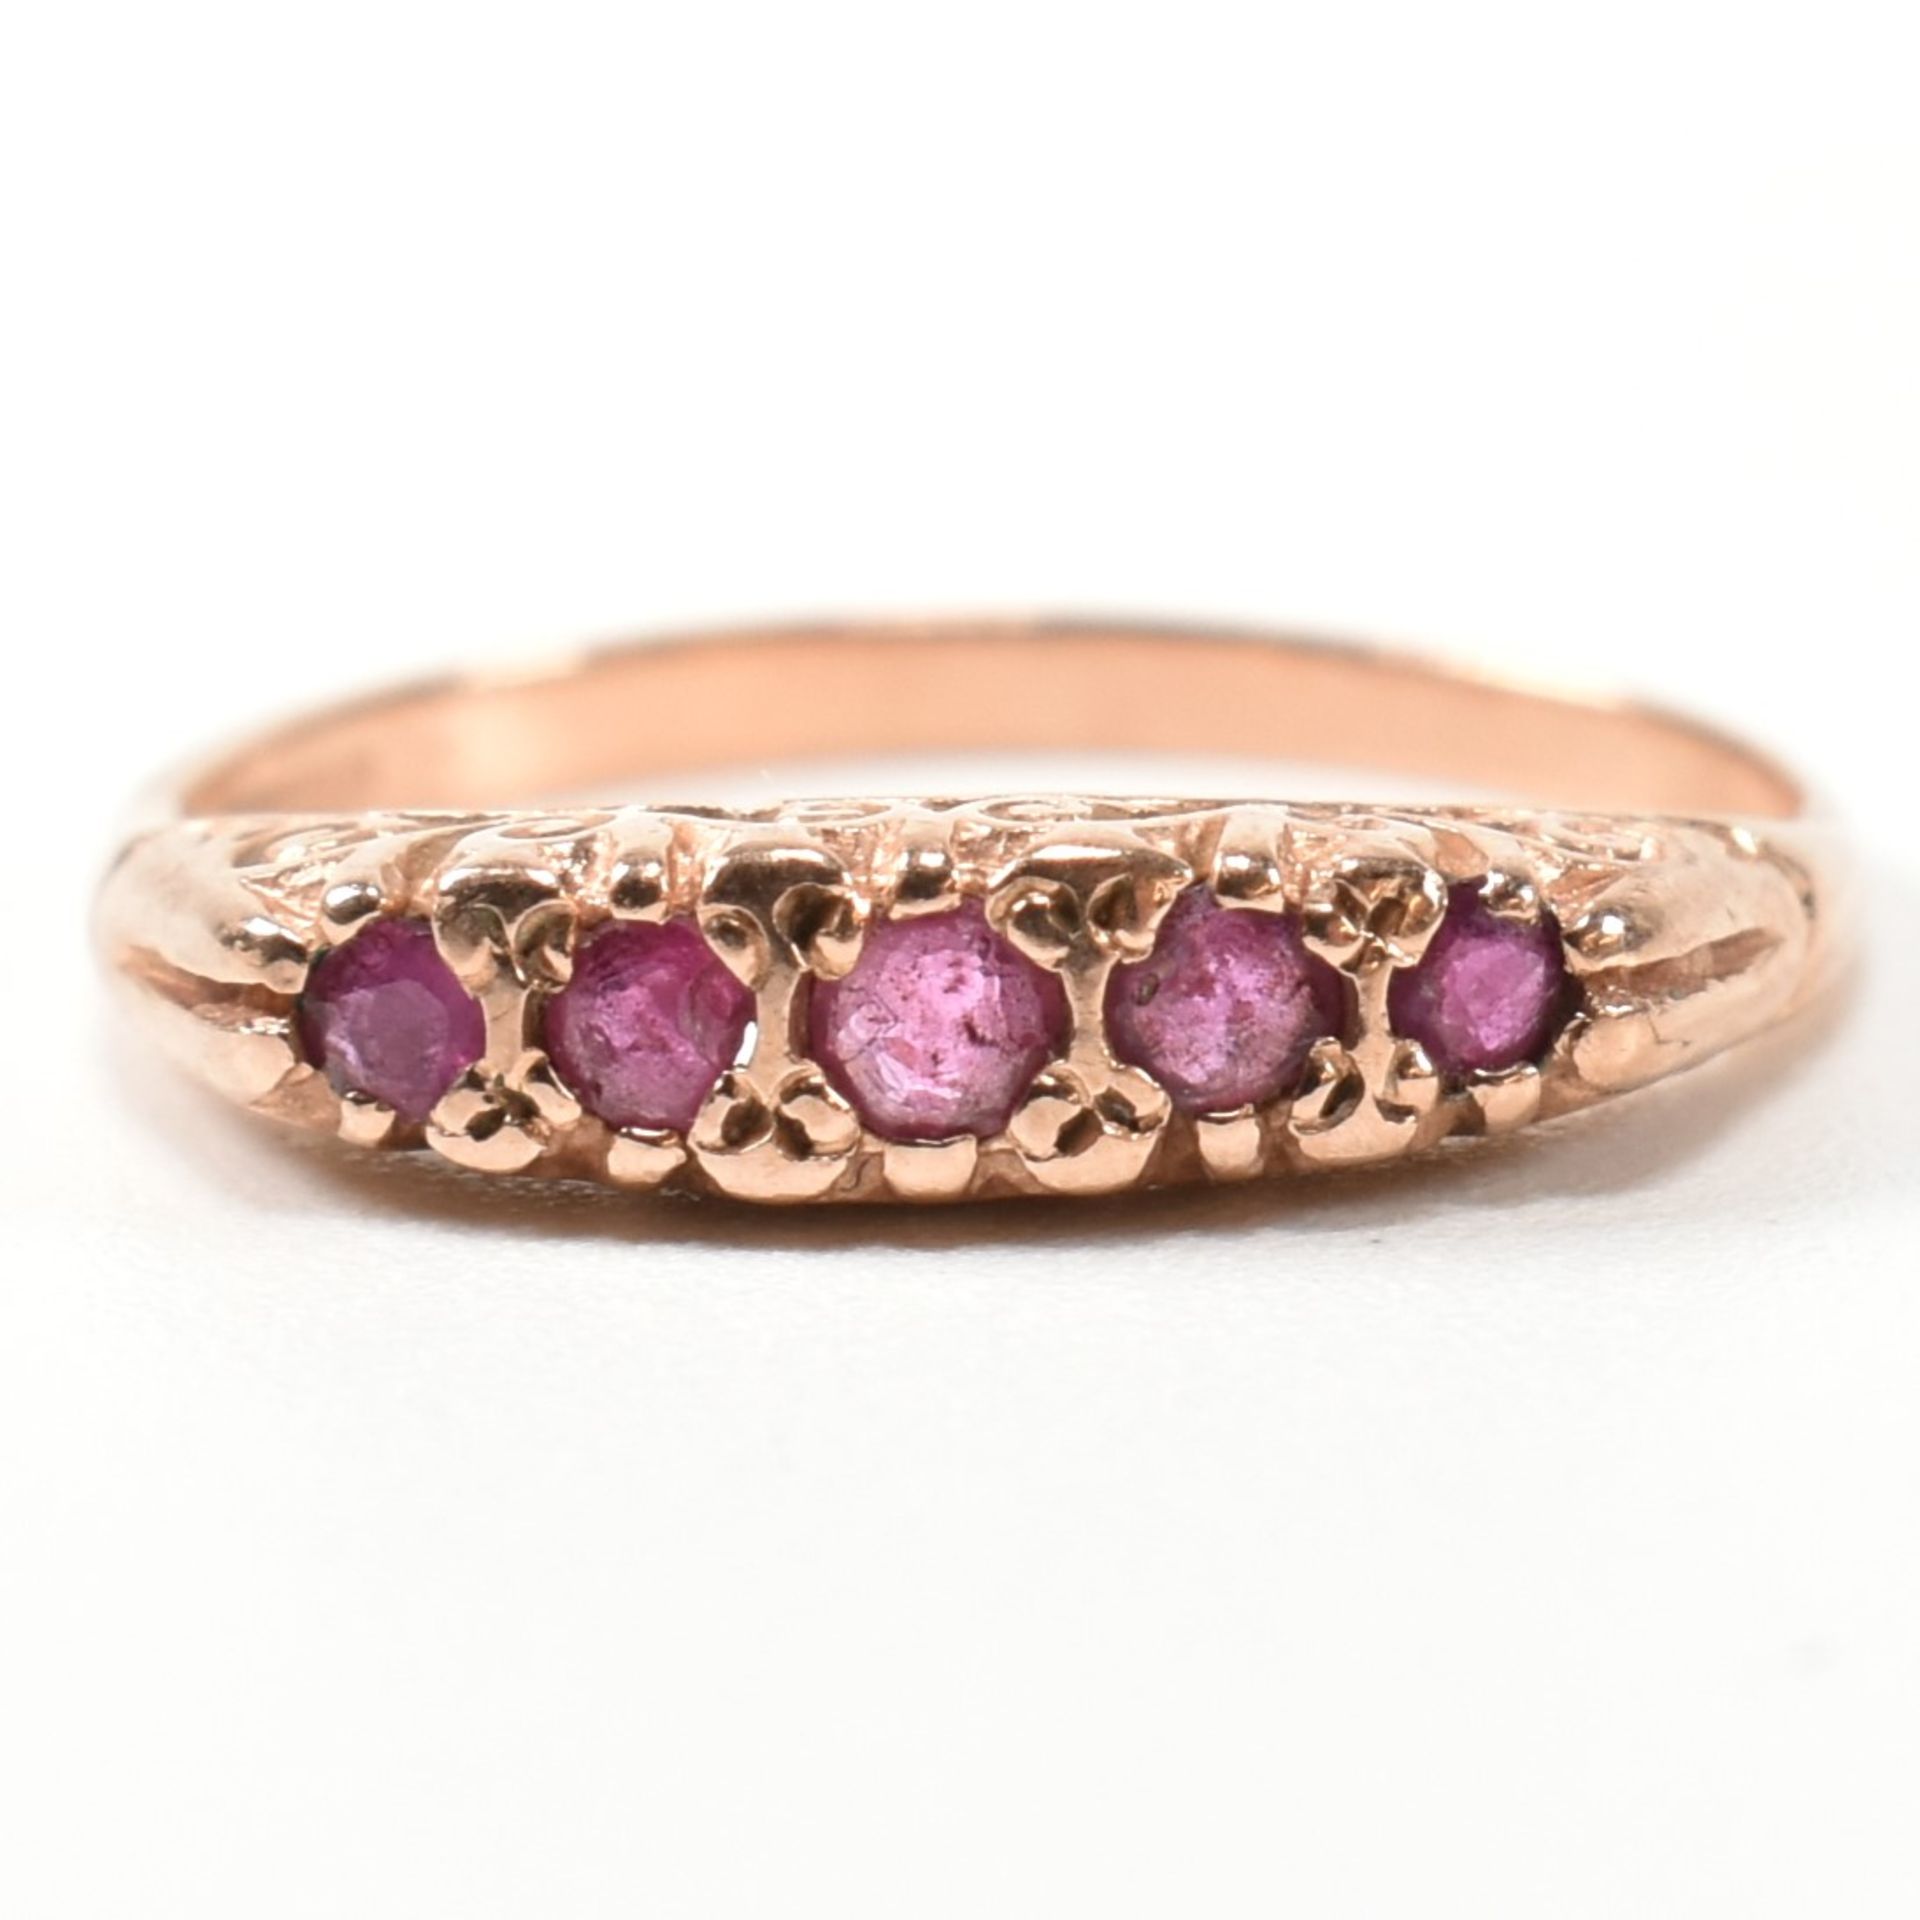 HALLMARKED 9CT ROSE GOLD & RUBY FIVE STONE GYPSY RING